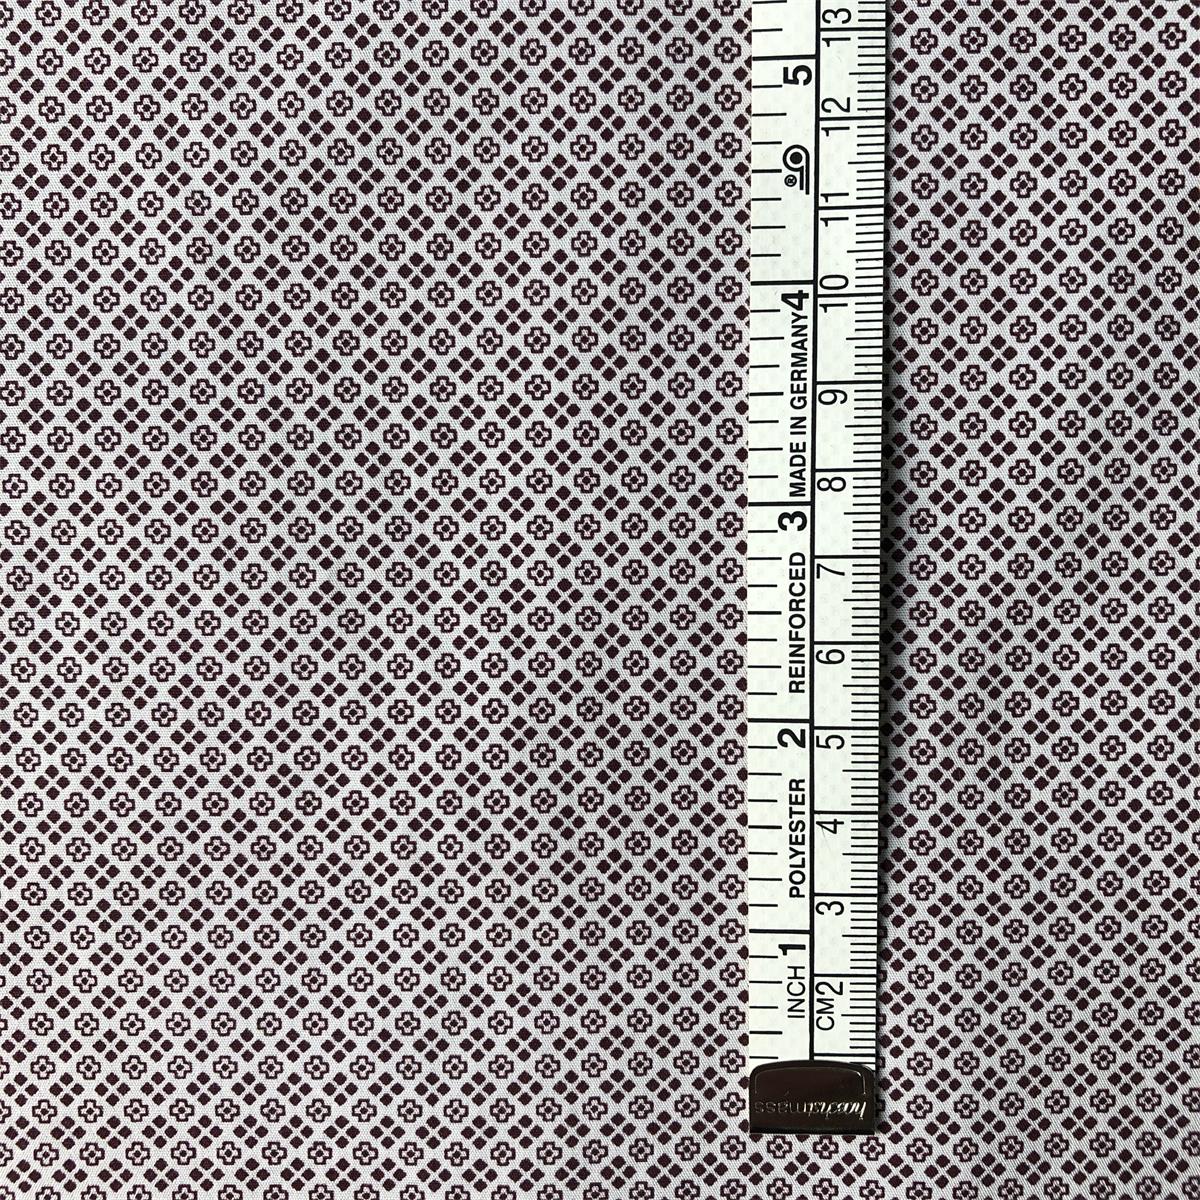 Eco-friendly Textile Cotton Printed fabric for mens casual shirts 100 cotton poplin printed shirts woven fabric soft touch